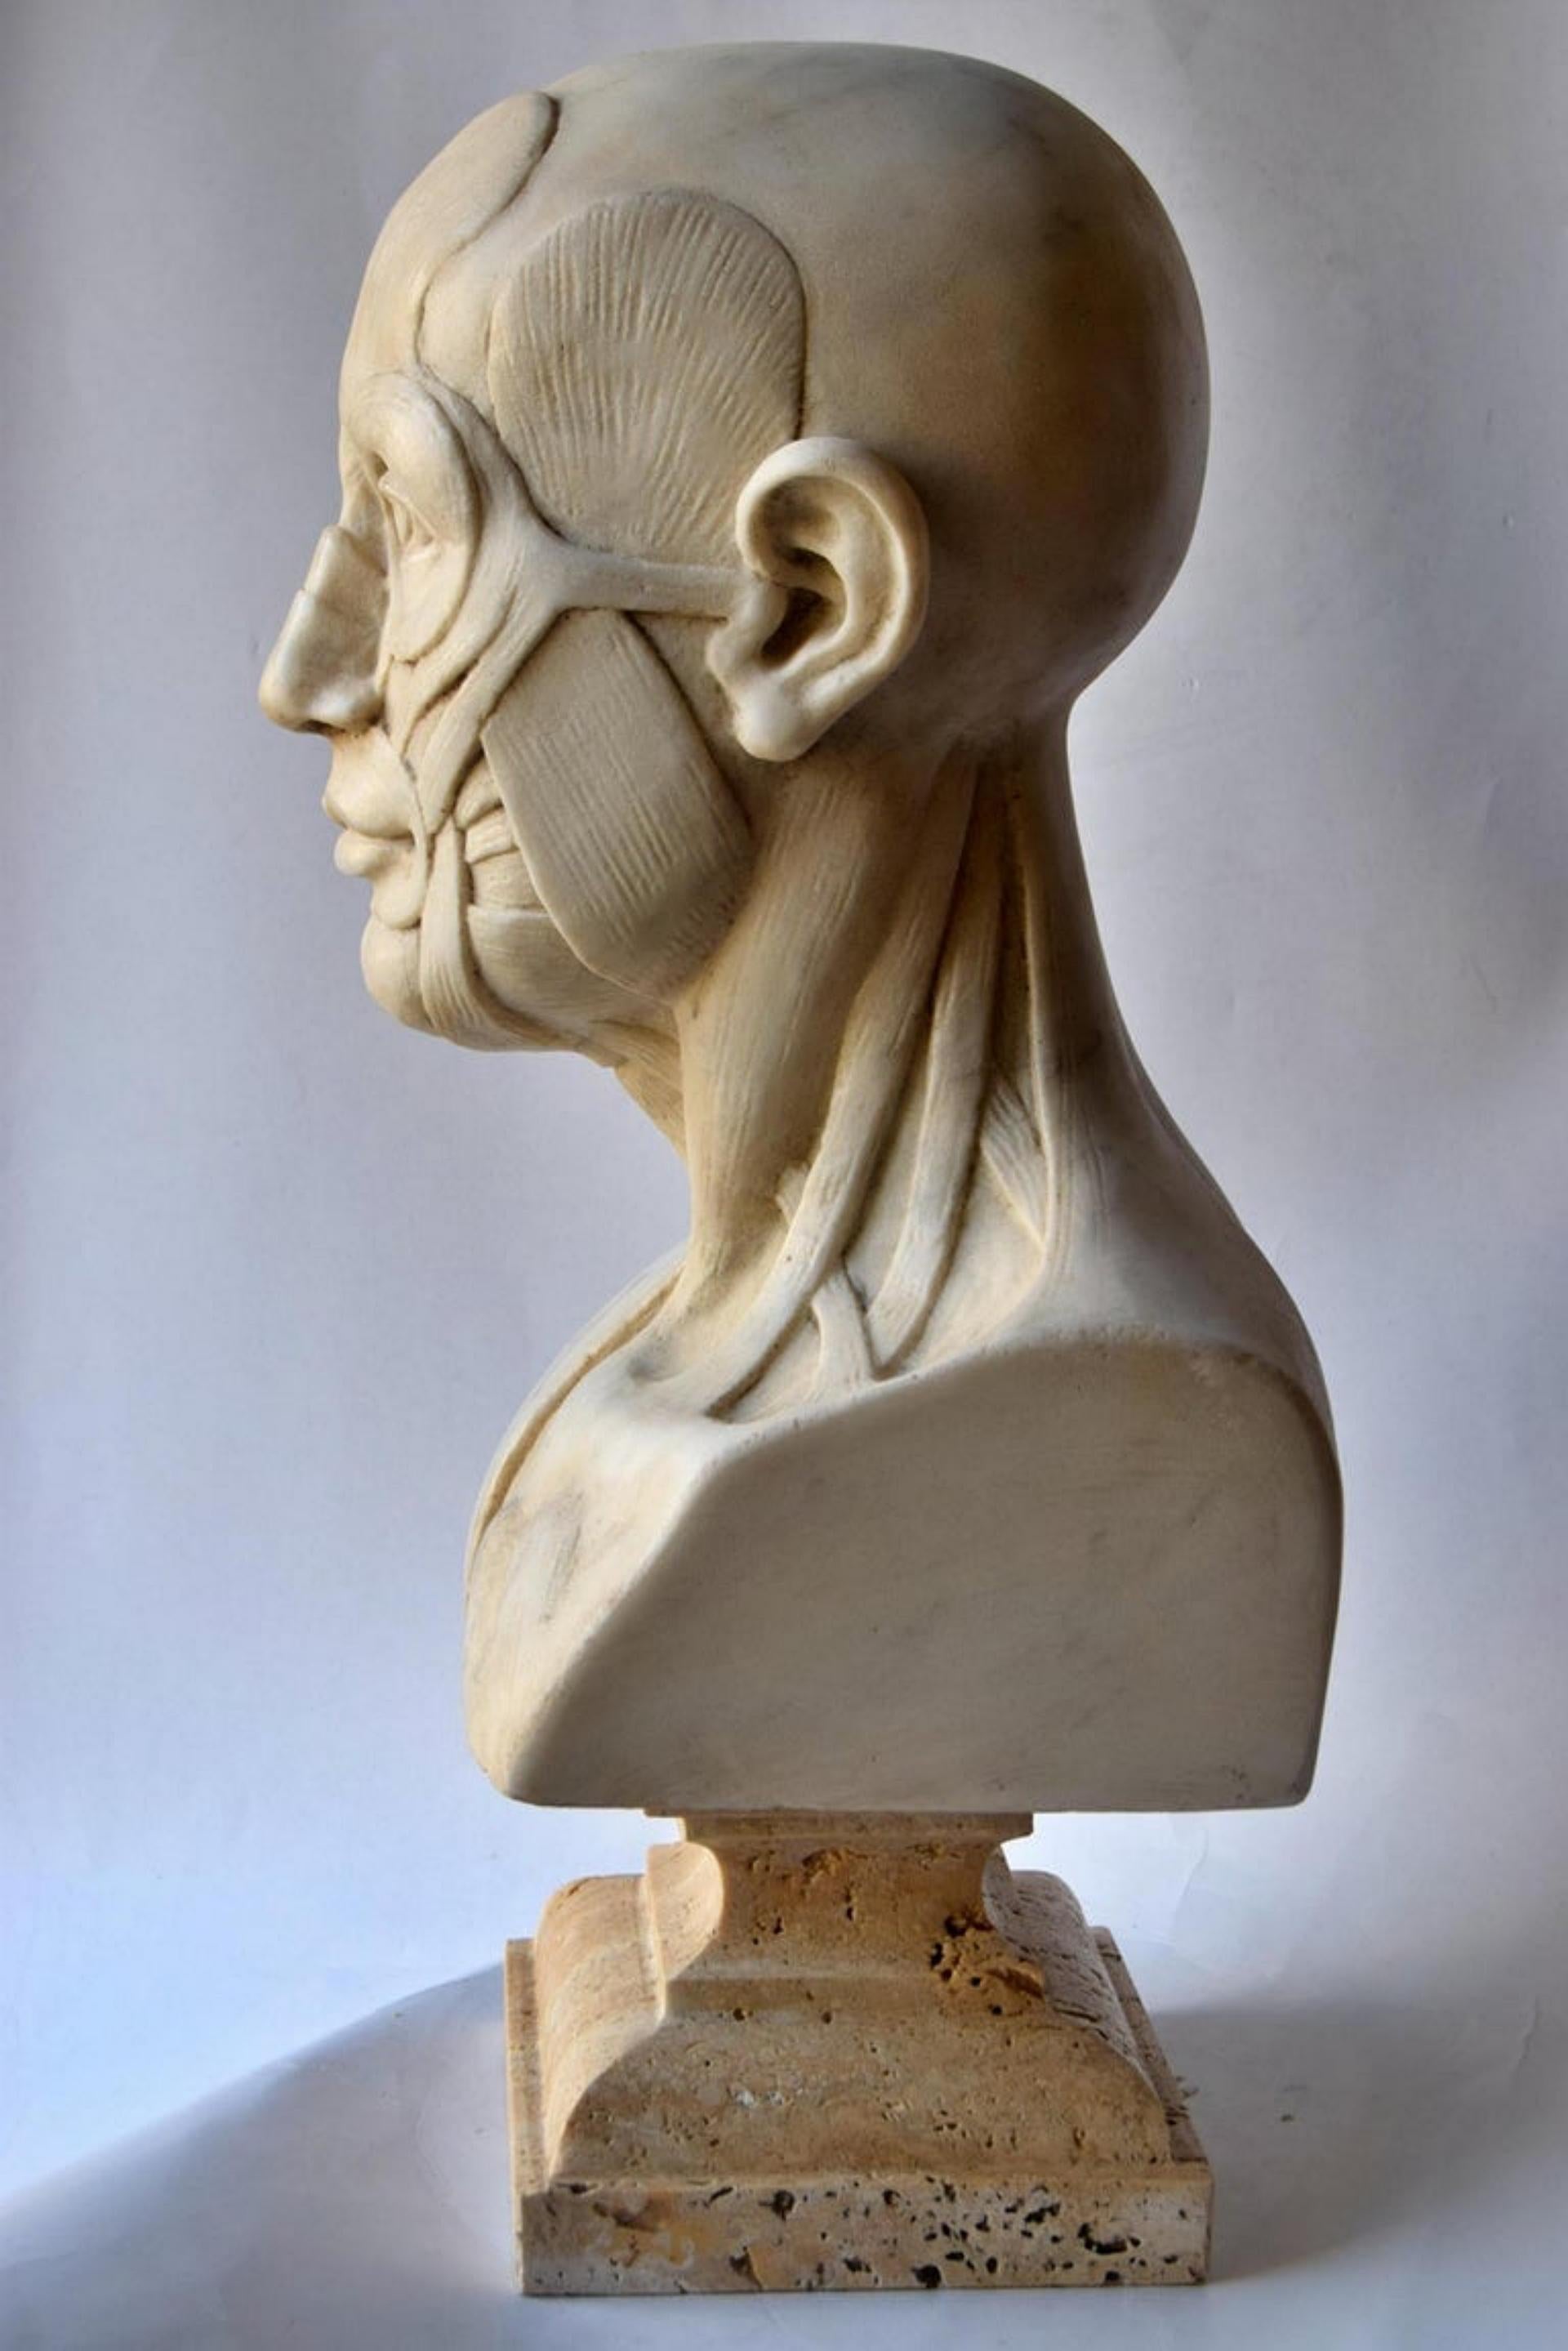 Hand-Crafted Anatomical Sculpture in White Carrara Marble, Early 20th Century For Sale